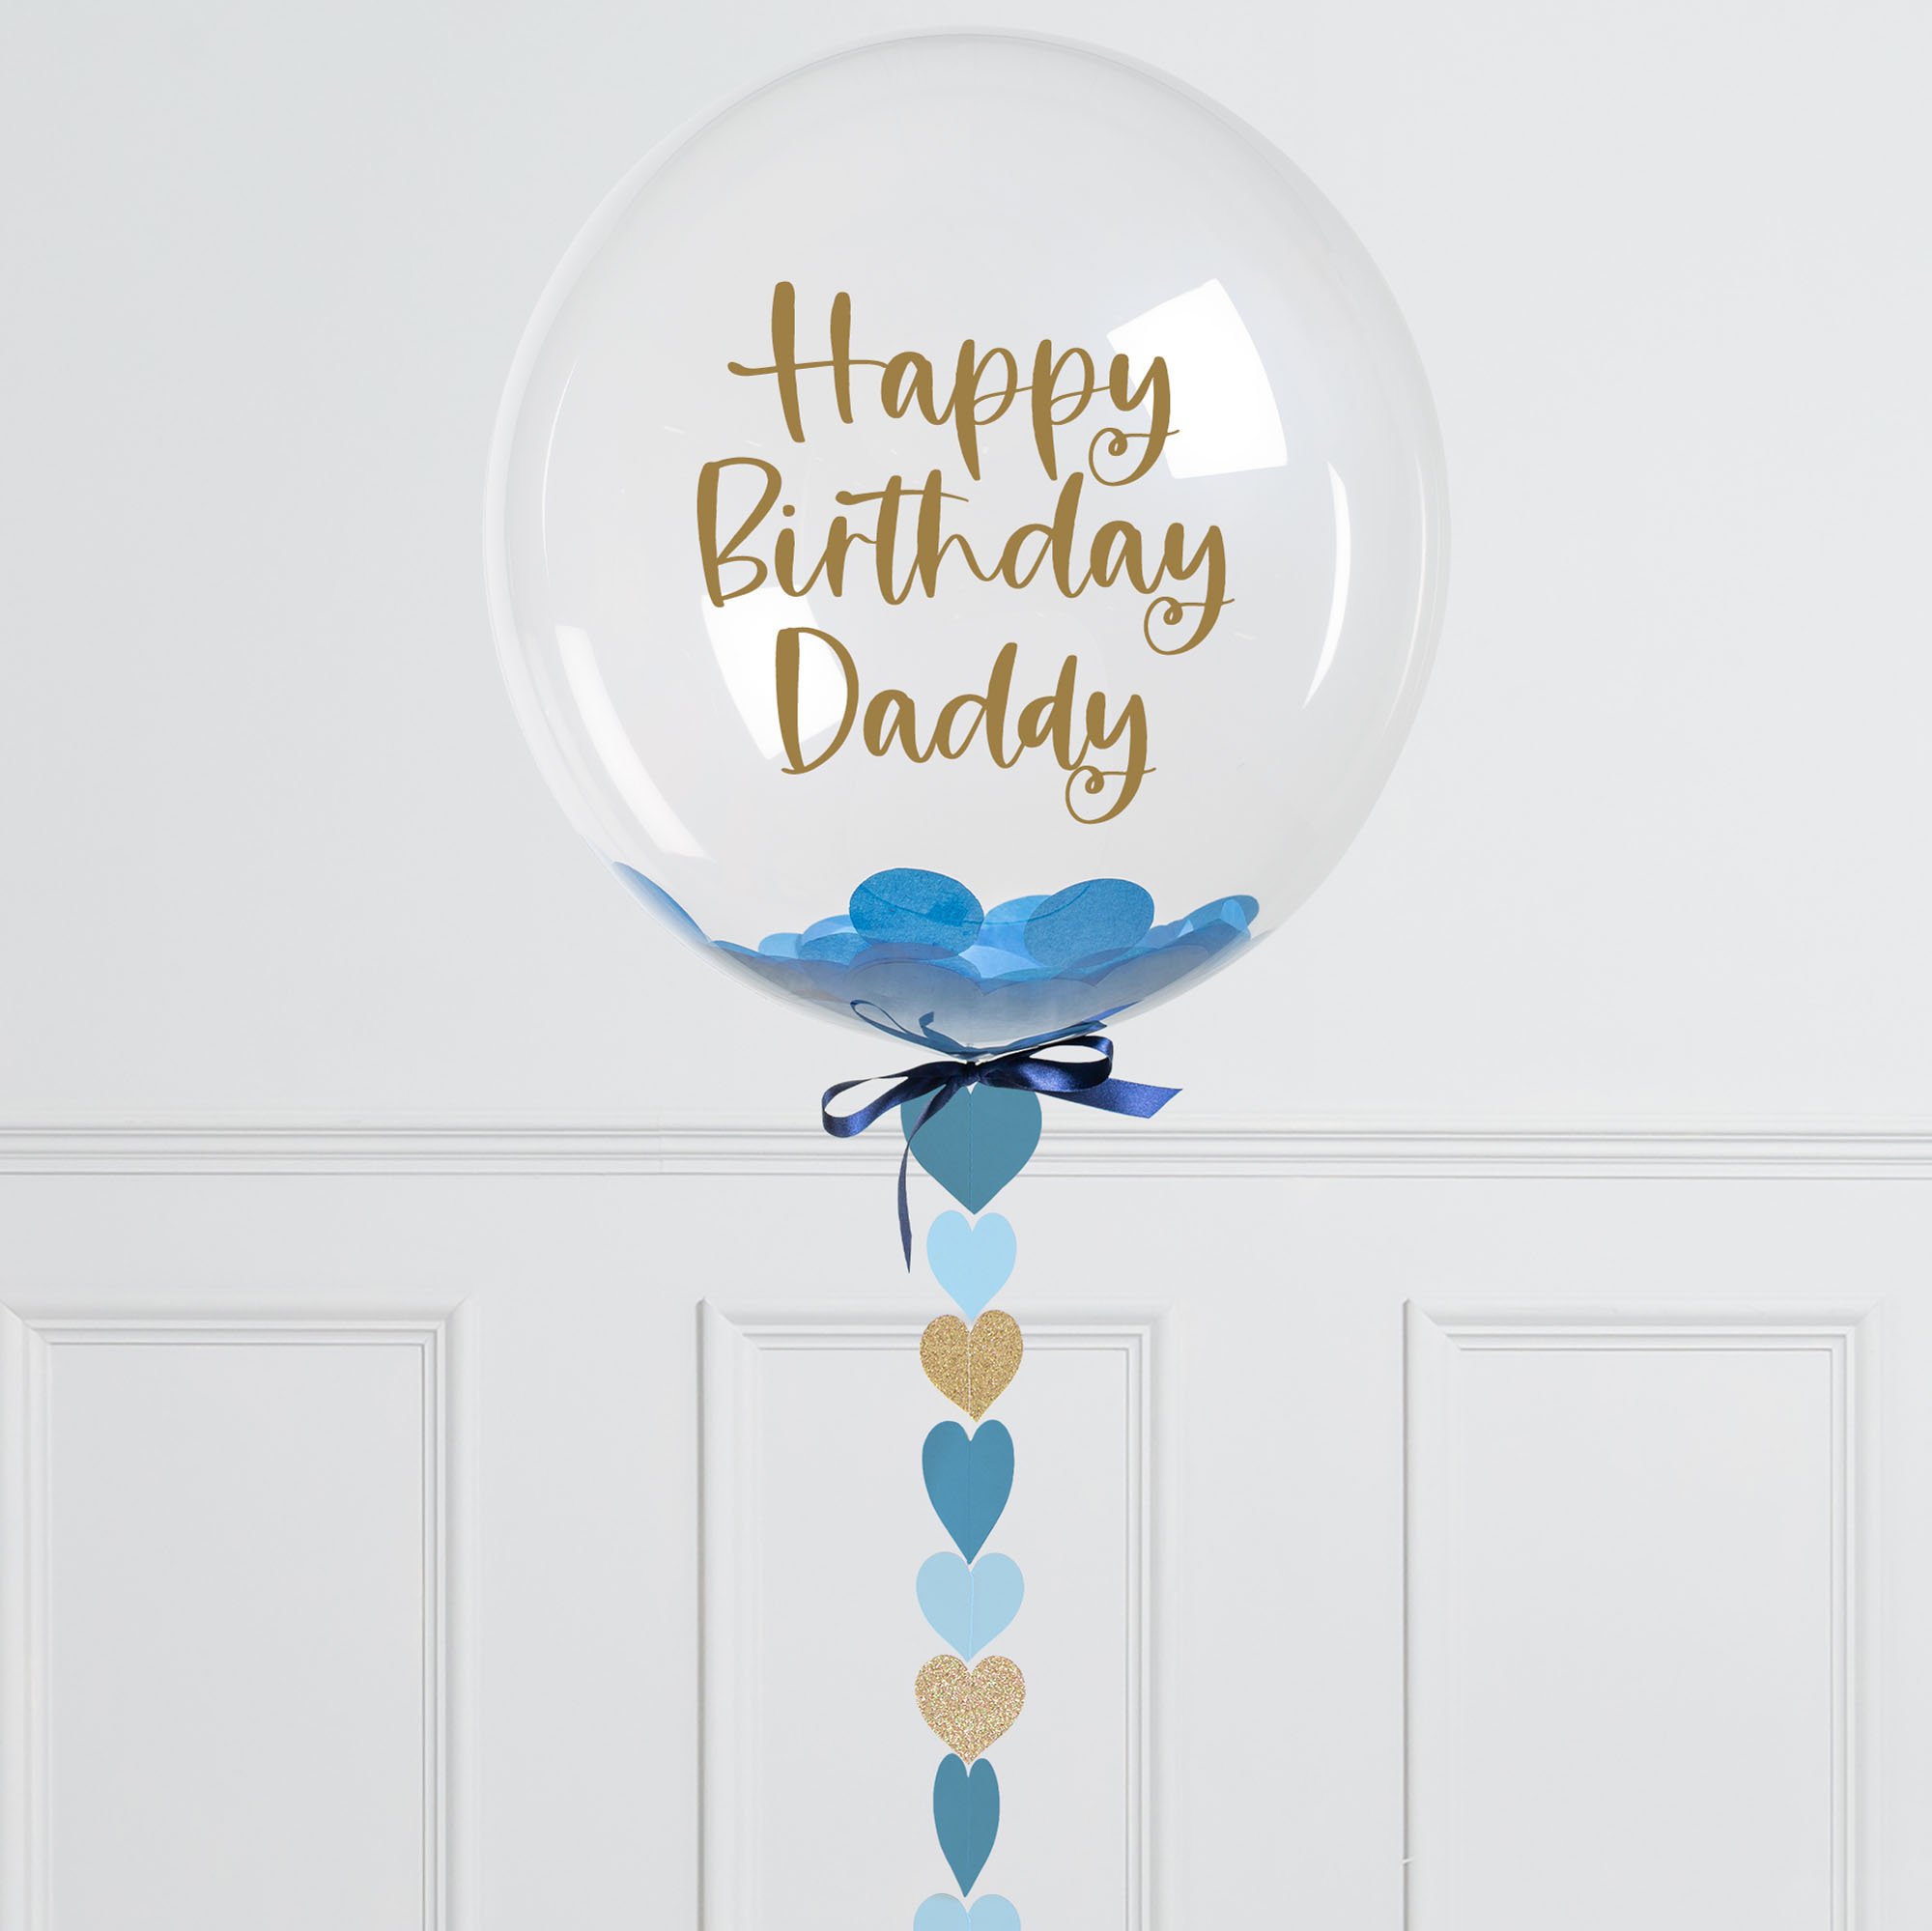 Personalised 20-Inch Blue Heart Confetti Bubblegum Balloon - DELIVERED INFLATED!